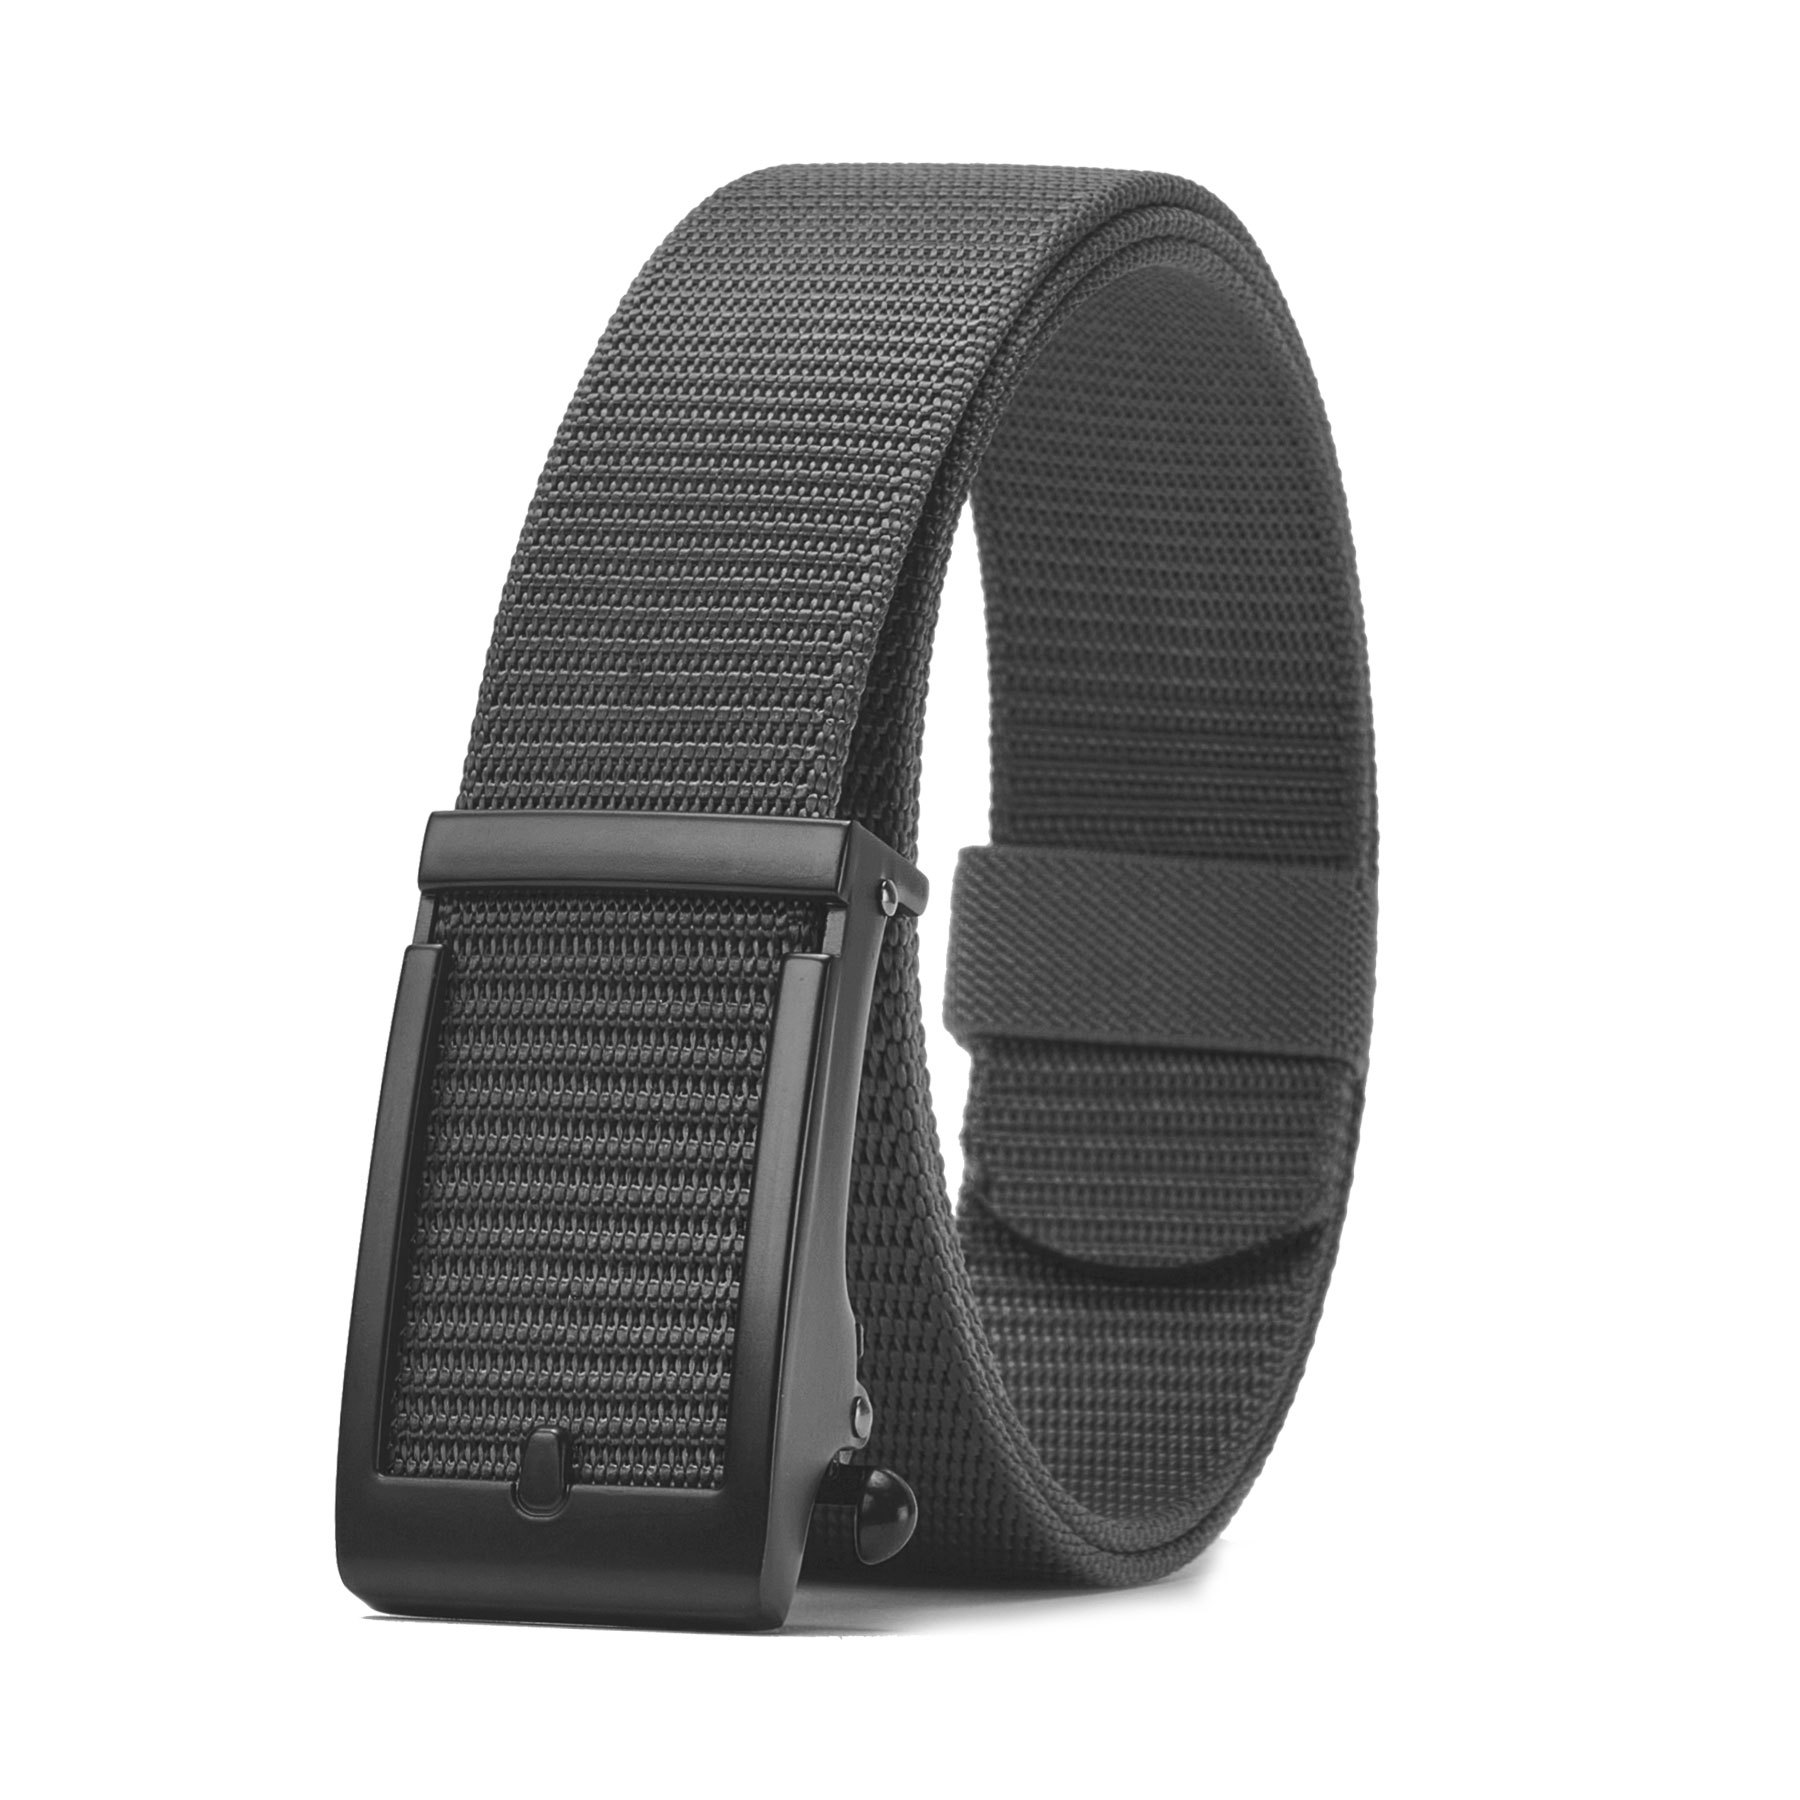 Dropship Hefujufang Nylon Ratchet Belt Golf Belt Cobra Buckle For Men/Women  Web Belt With Automatic Slide Buckle,Valentines Day Gift… to Sell Online at  a Lower Price